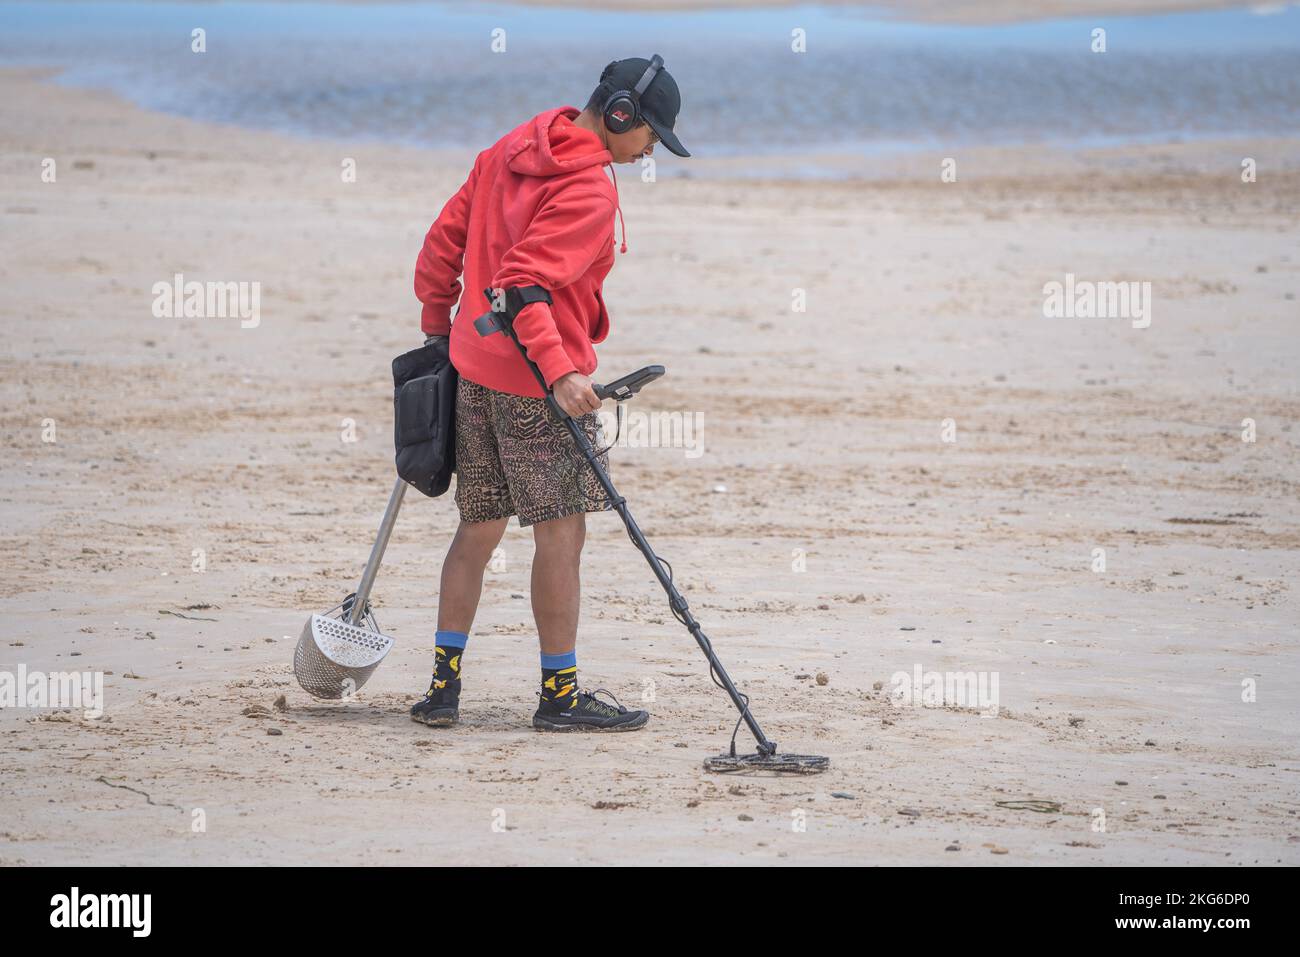 Adelaide, Australia. 22 November 2022.  A metal detectorist scouring the beach in Adelaide, South Australia  on a mild sunny day following several days of unsettled weather as temperatures are forecast to rise to mid 20celsius. Credit: amer ghazzal/Alamy Live News Stock Photo